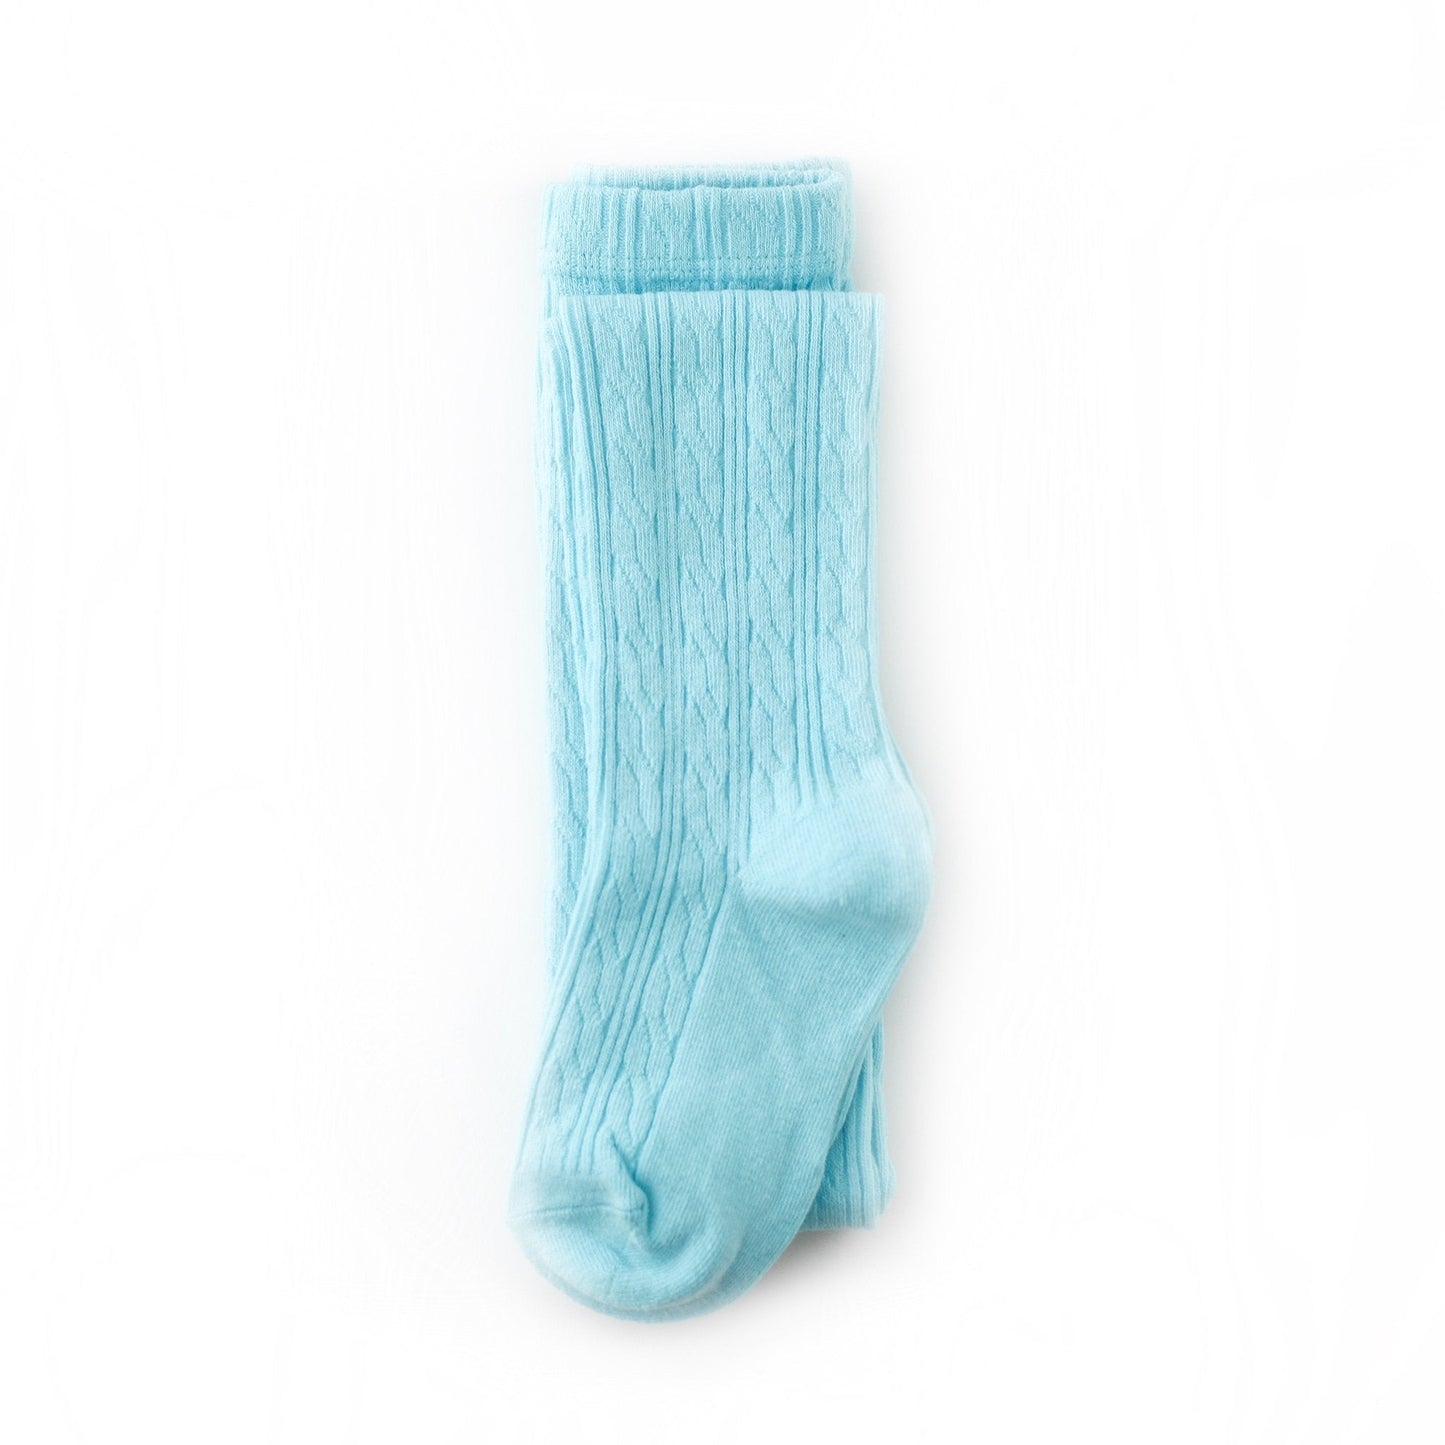 Aqua cable knit tights by little stocking co.